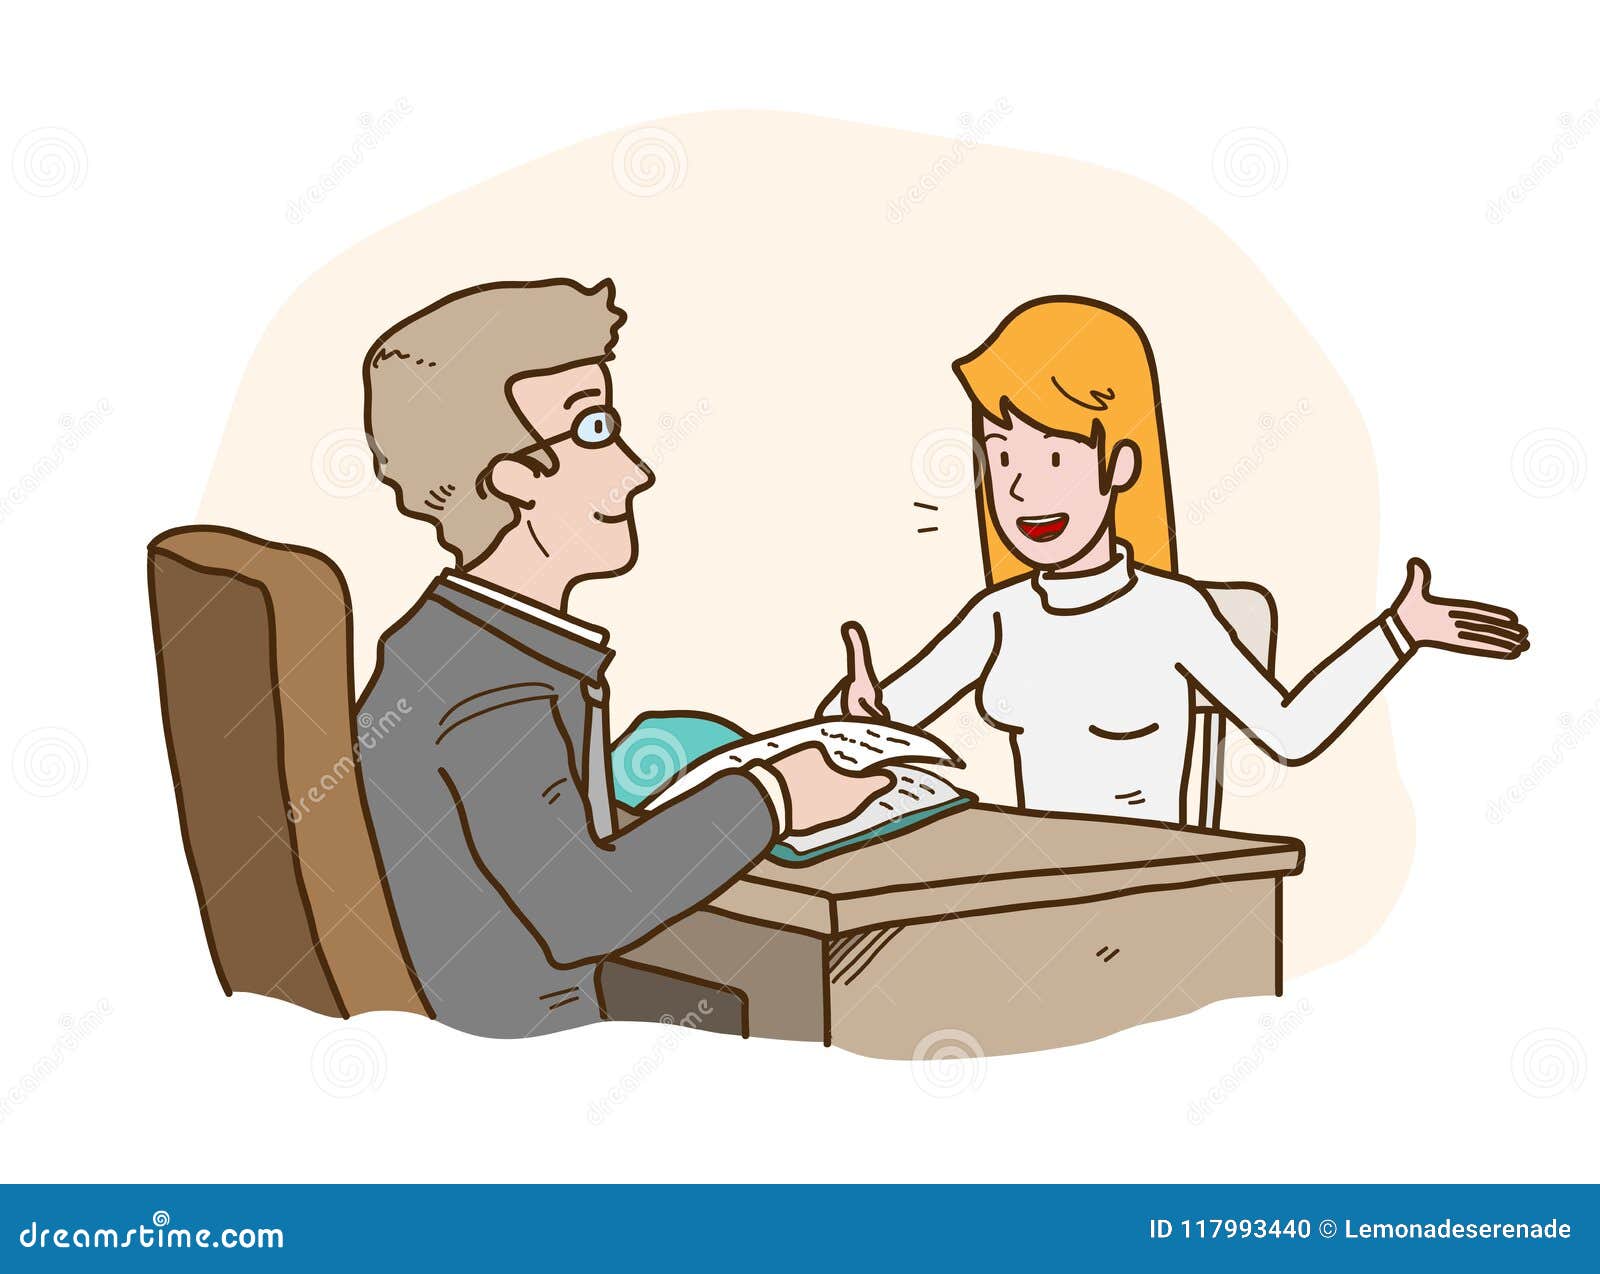 Job Interview Presentation, a Hand Drawn Vector Cartoon Illustration of a  Job Seeker Introducing Herself To the HRD Manager. Stock Vector -  Illustration of concept, businessman: 117993440